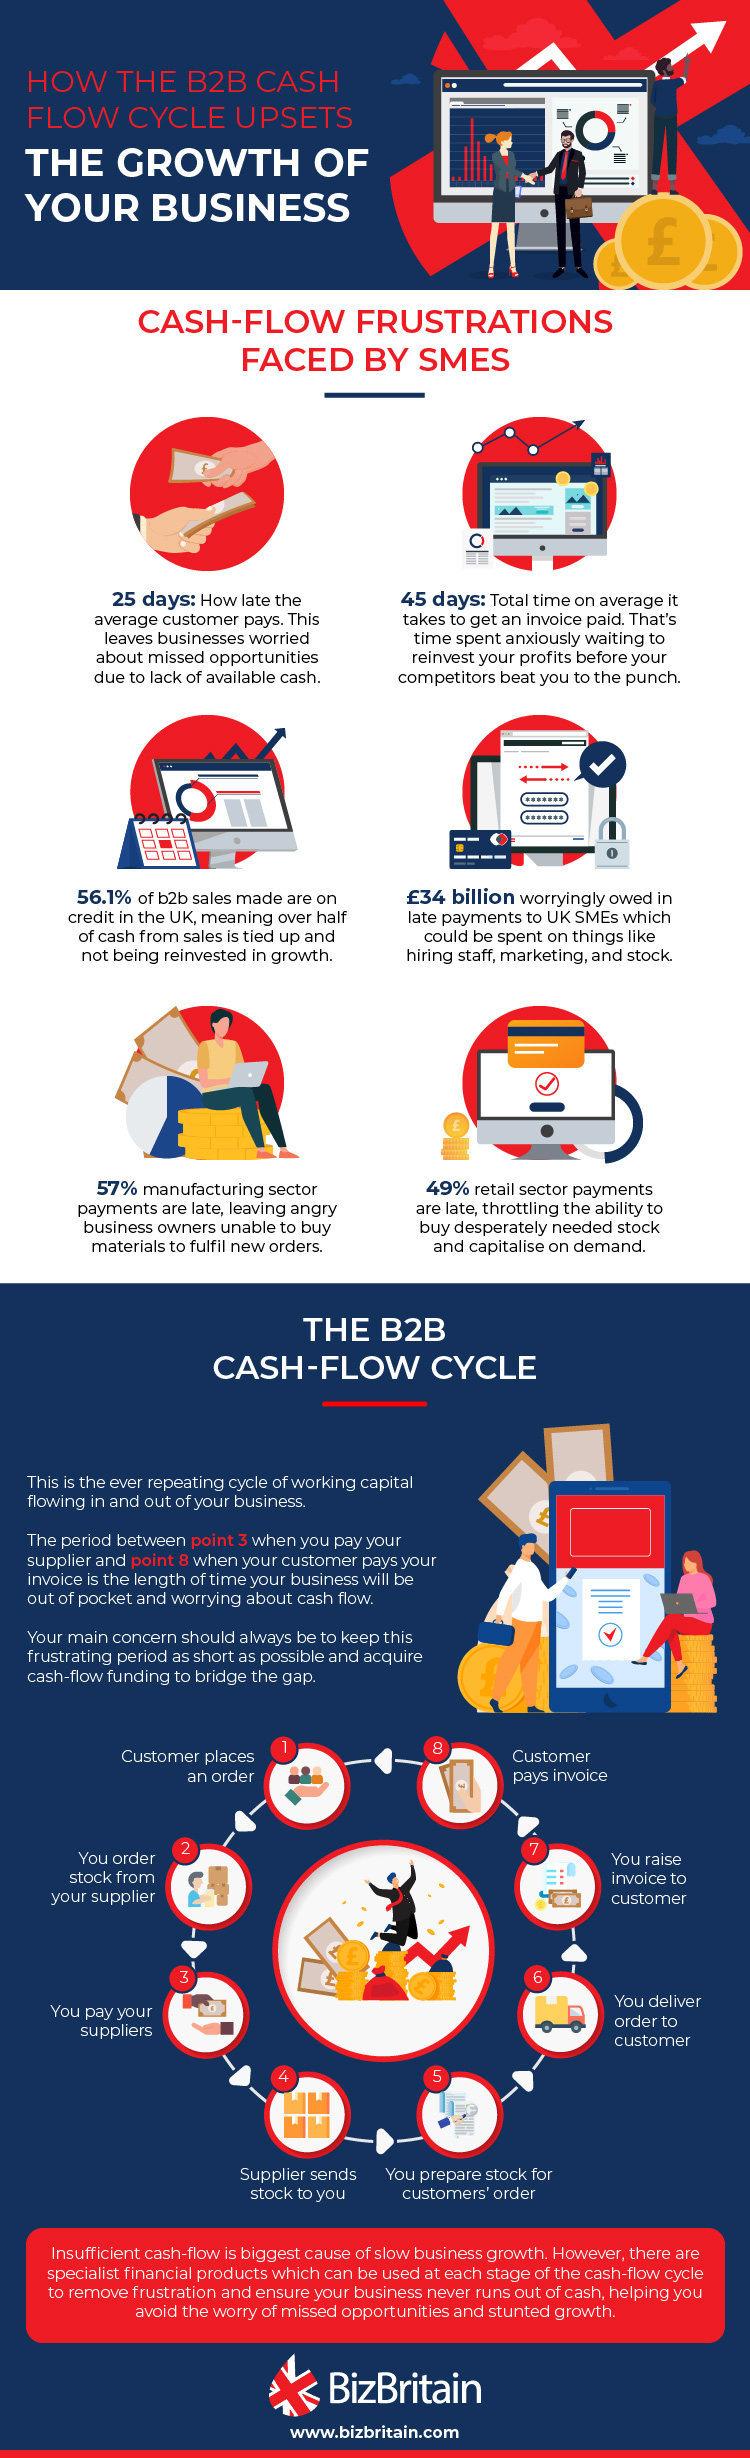 How the B2B Cash Flow Cycle Upsets the Growth of Your Business